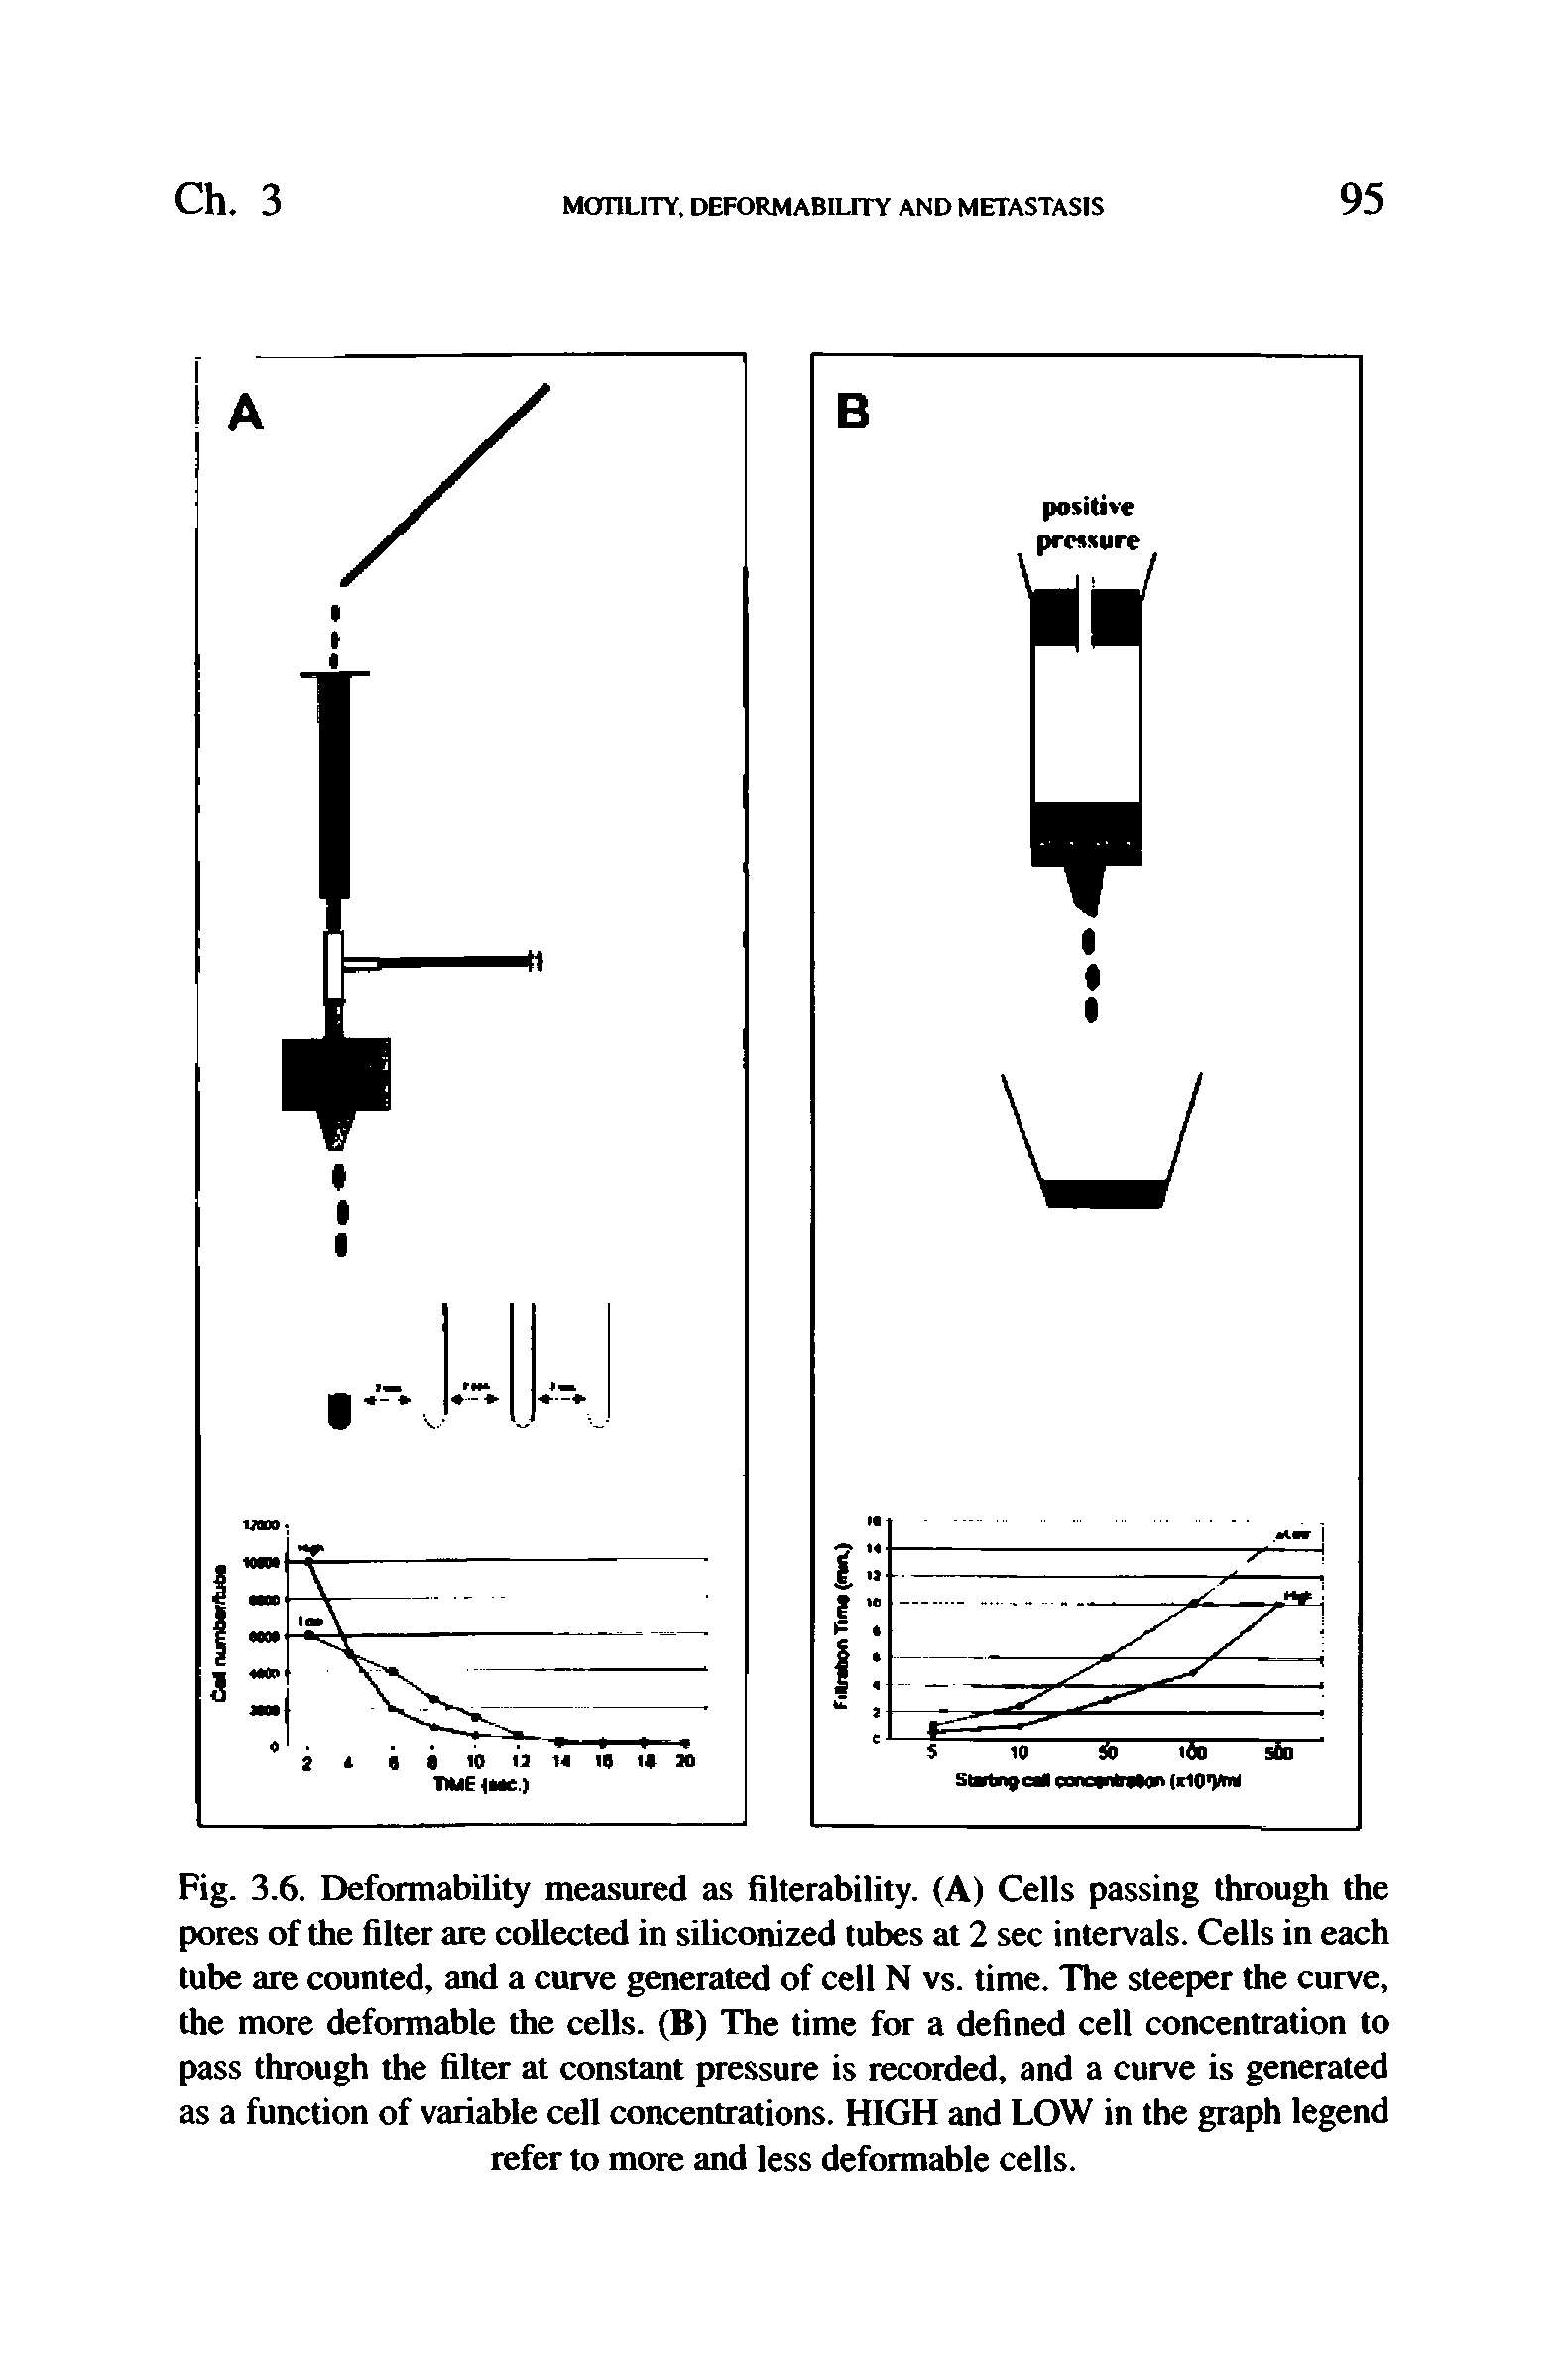 Fig. 3.6. Deformability measured as filterability. (A) Cells passing through the pores of the filter are collected in siliconized tubes at 2 sec intervals. Cells in each tube are counted, and a curve generated of cell N vs. time. The steejjer the curve, the more deformable the cells. (B) The time for a defined cell concentration to pass through the filter at constant pressure is recorded, and a curve is generated as a function of variable cell concentrations. HIGH and LOW in the graph legend refer to more and less deformable cells.